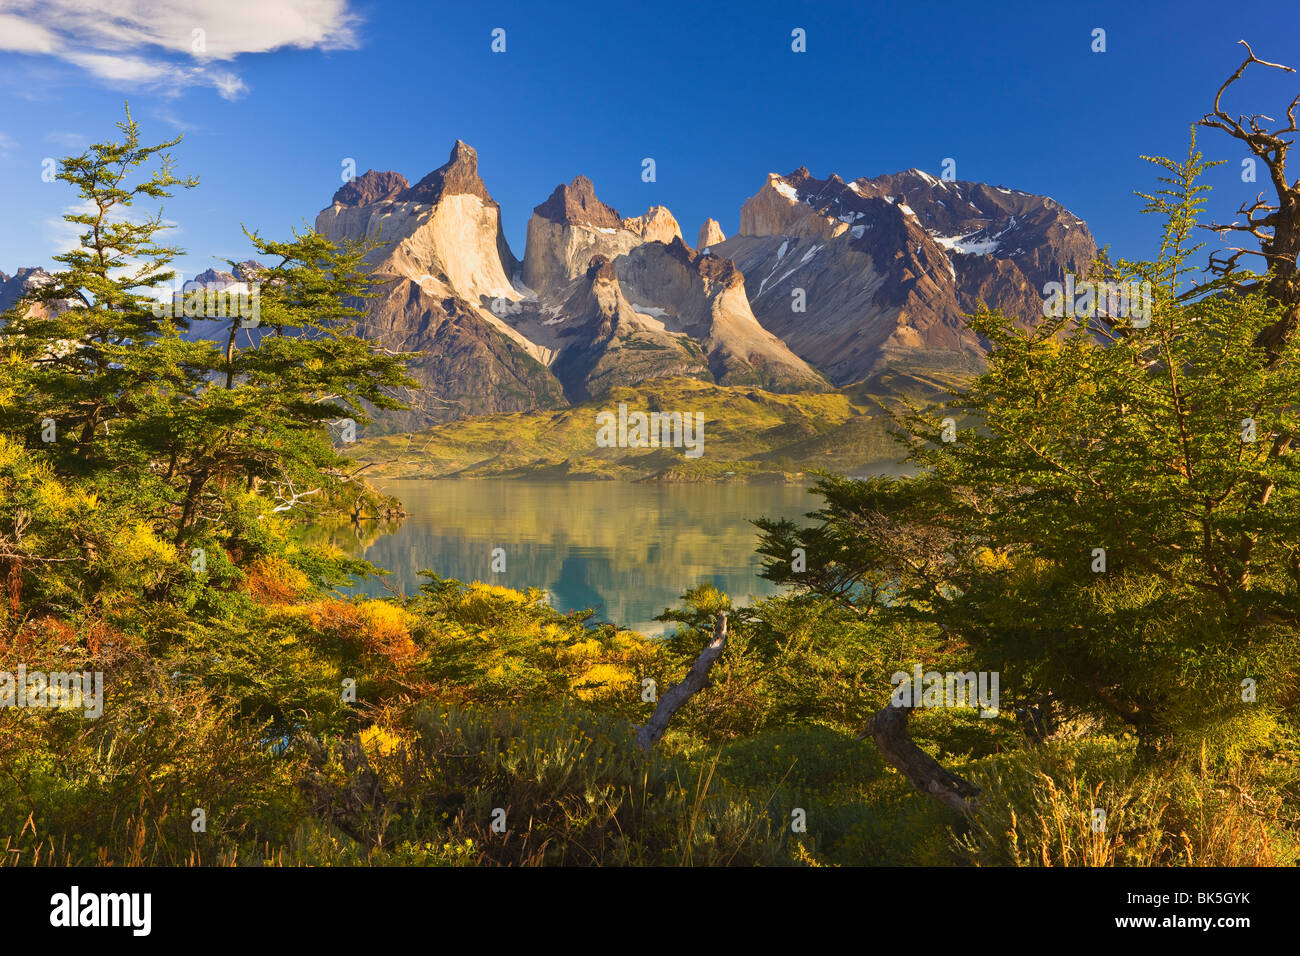 Cuernos del Paine reflected in Lago (Lake) Pehoe, Torres del Paine National Park, Patagonia, Chile Stock Photo